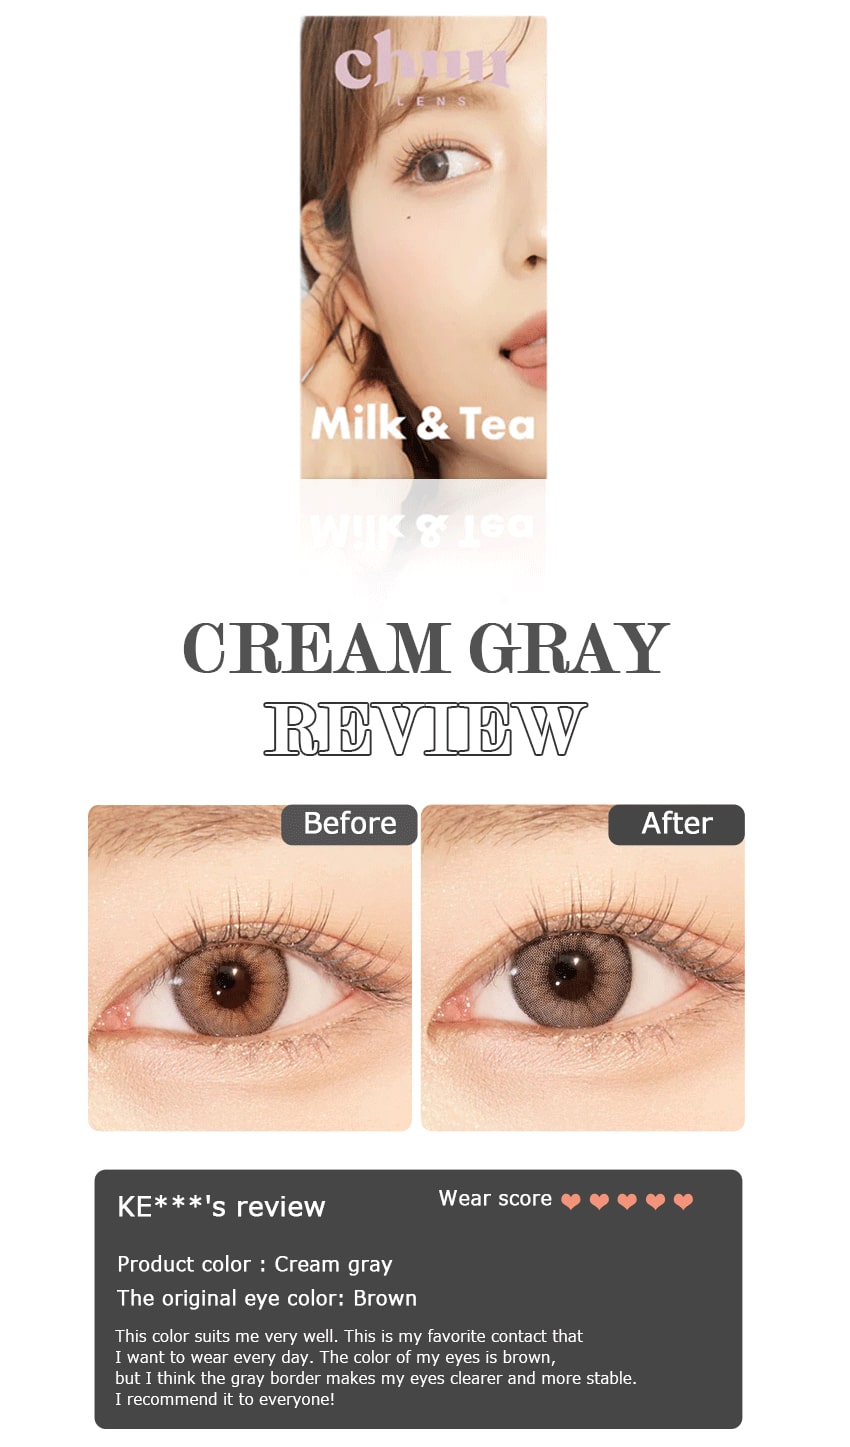 chuu, korean colored contacts, sns popular, new product, event product, gray,cream gray,cream,gray contacts